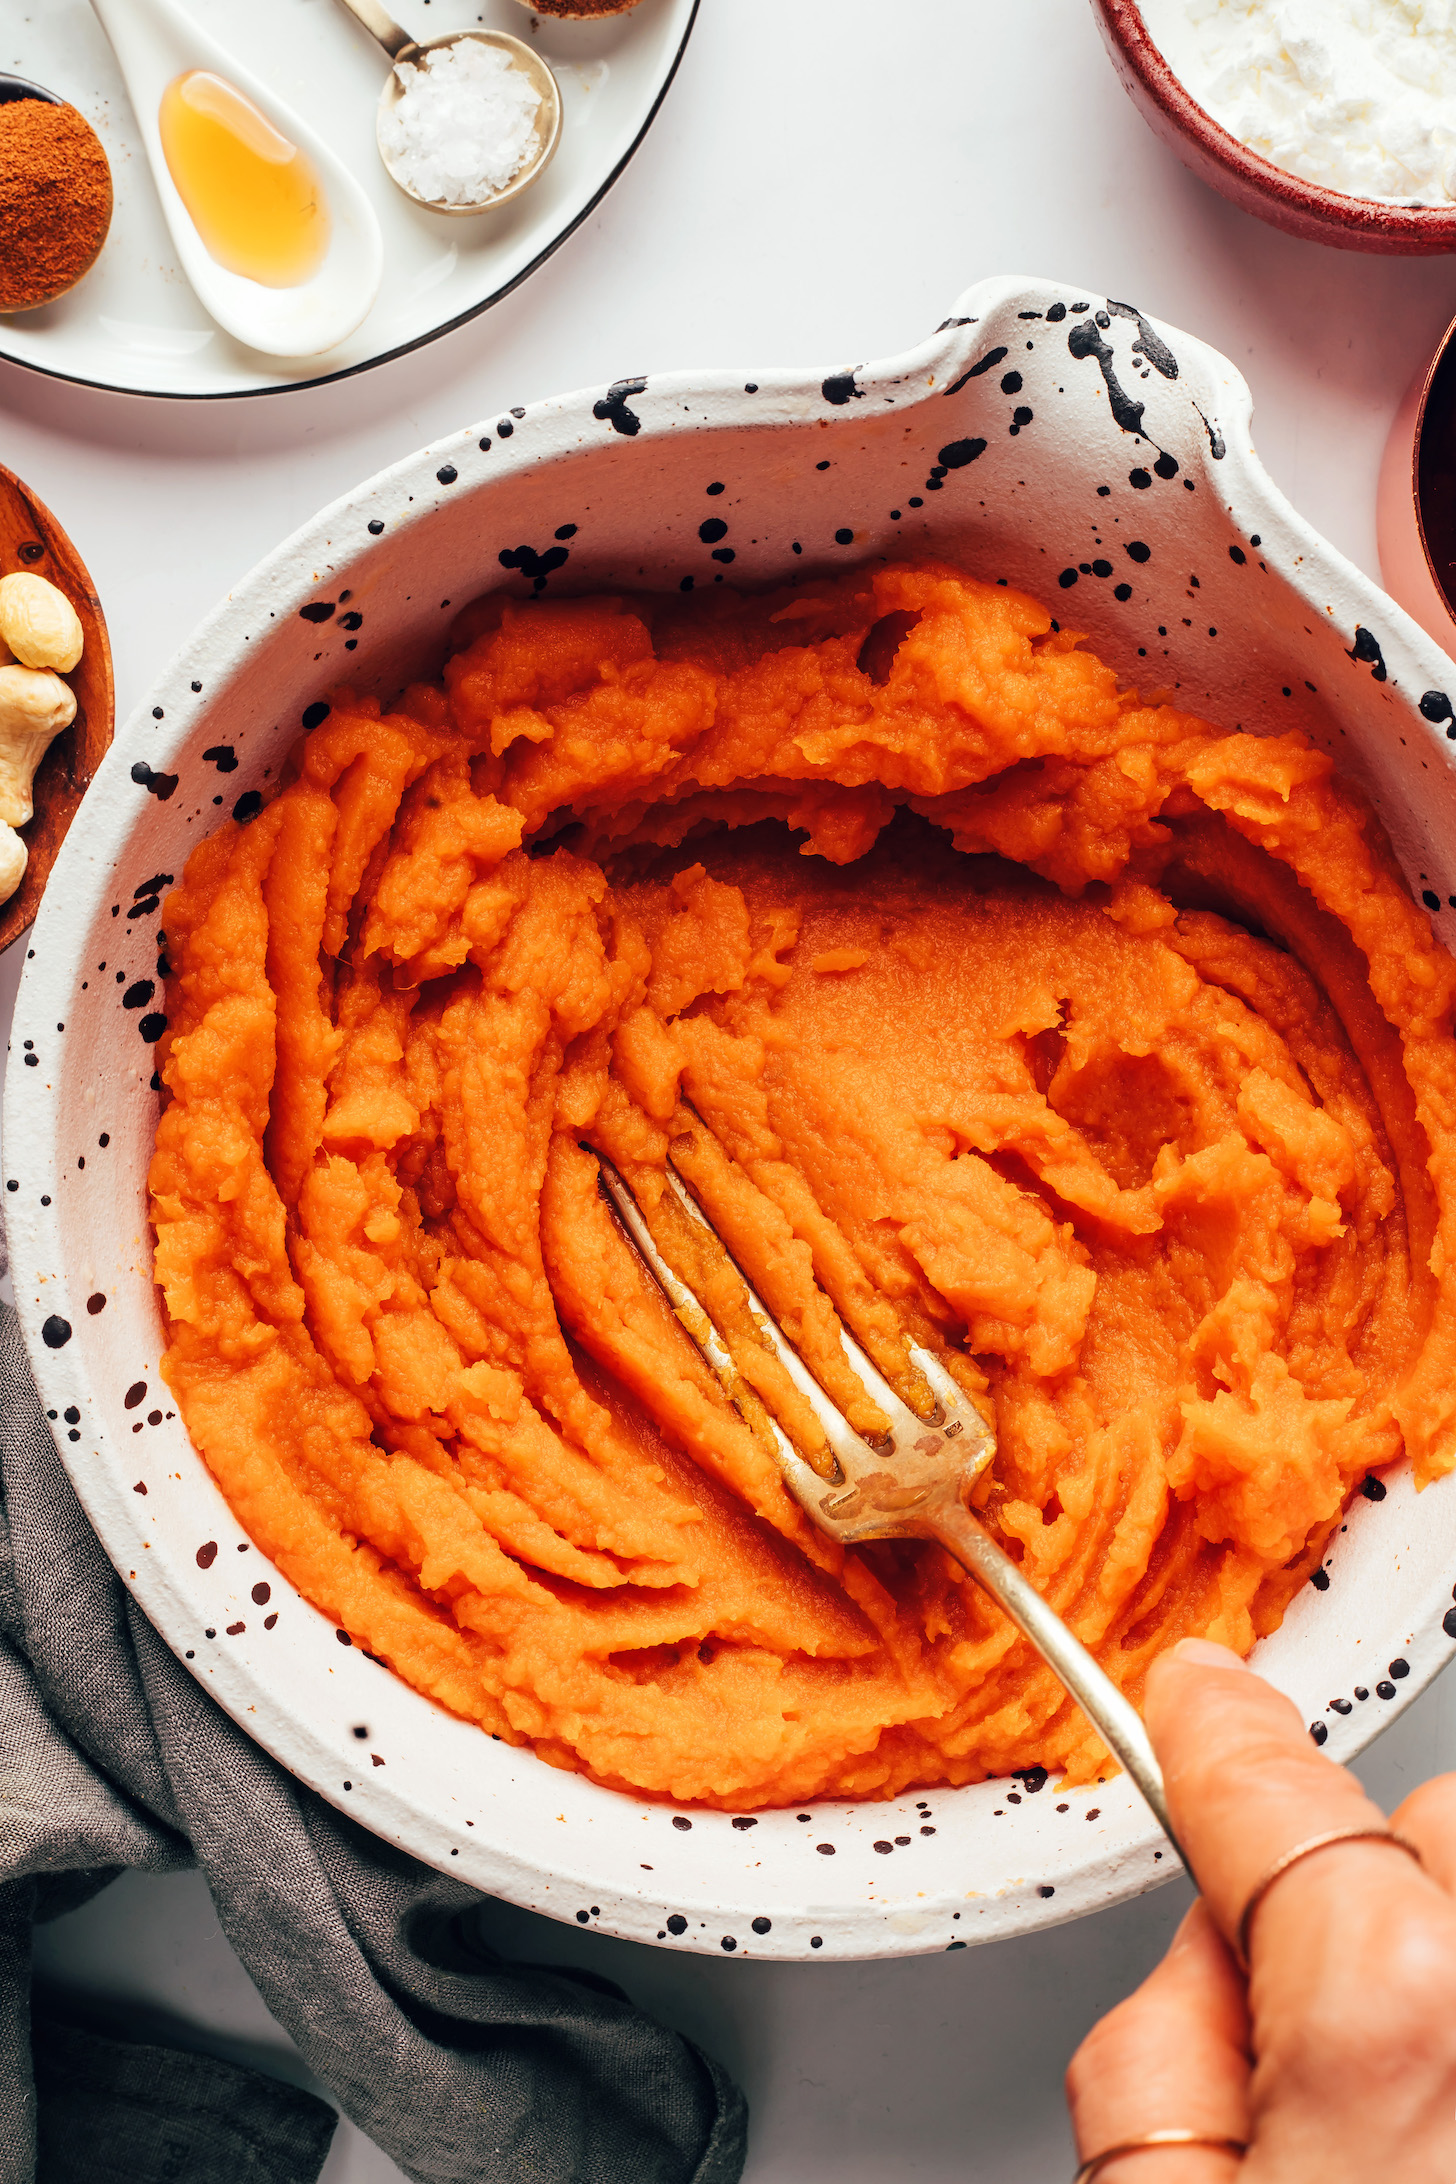 Using a fork to mash roasted sweet potato in a bowl